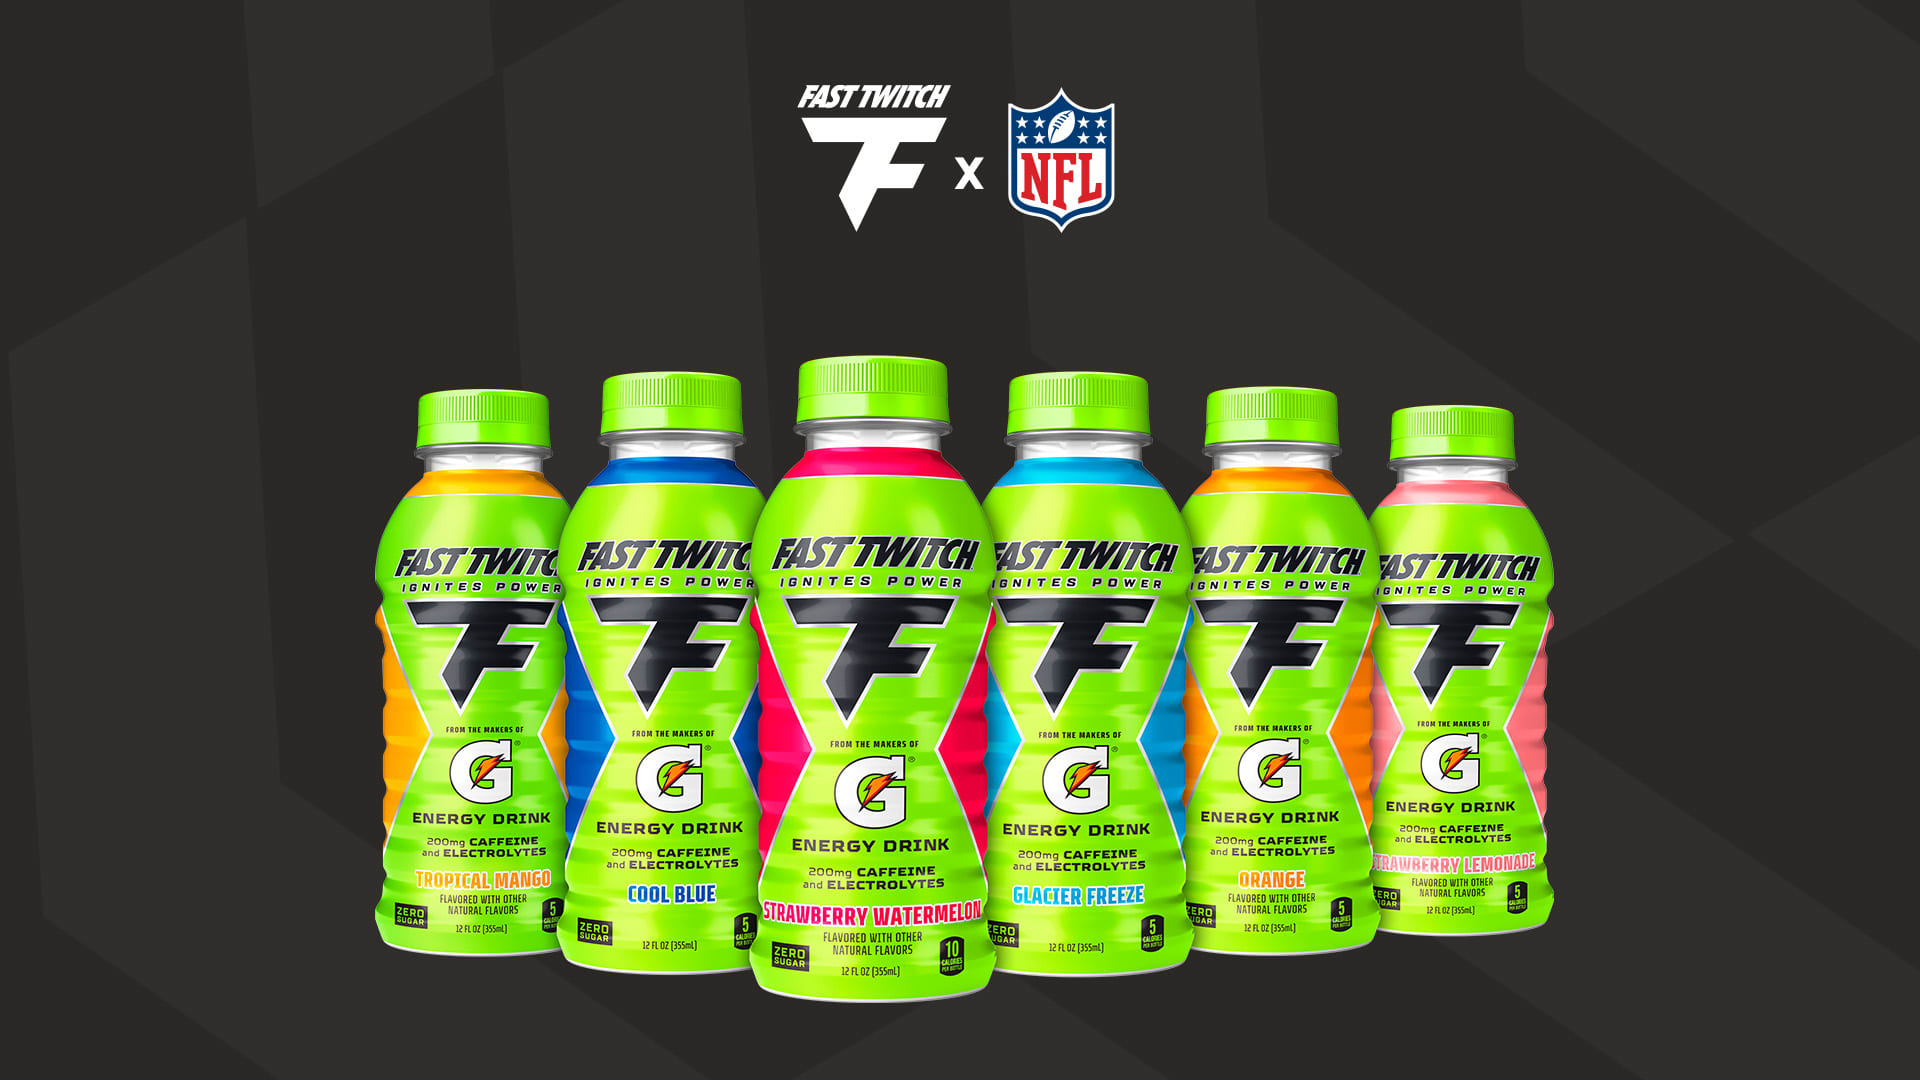 Gatorade adds caffeine to its lineup with energy drink Fast Twitch